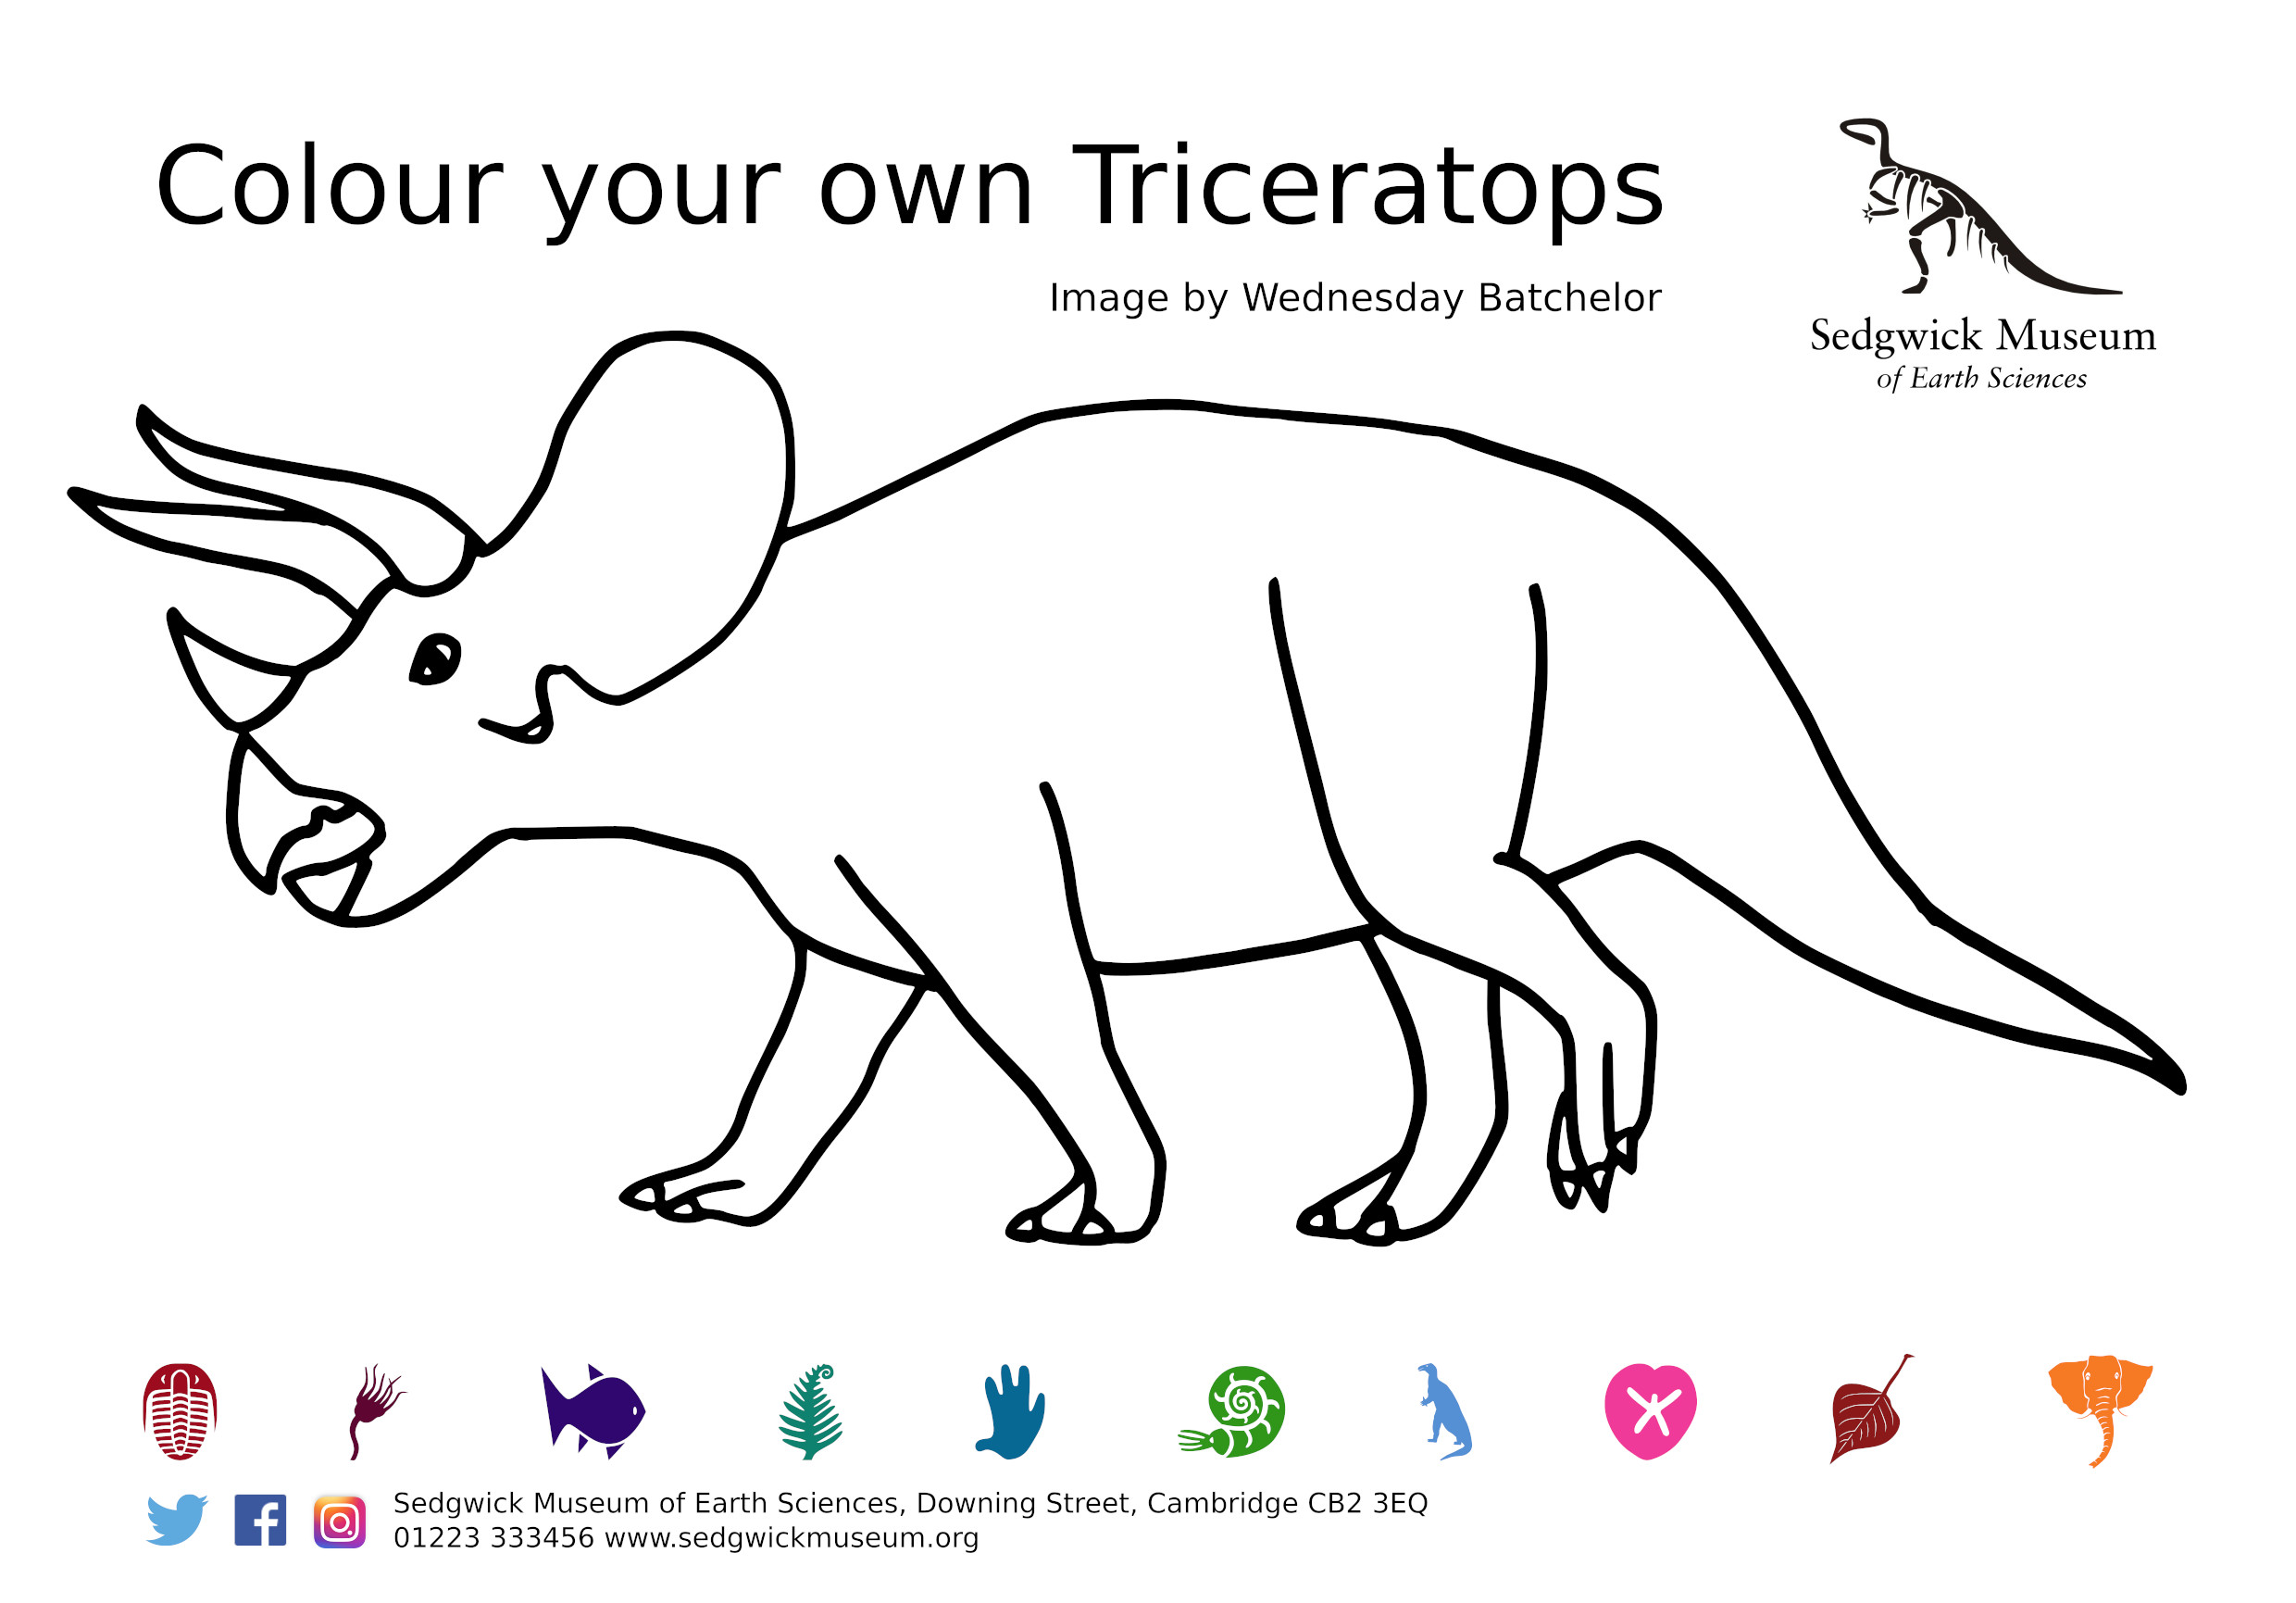 out line of a tricerratops